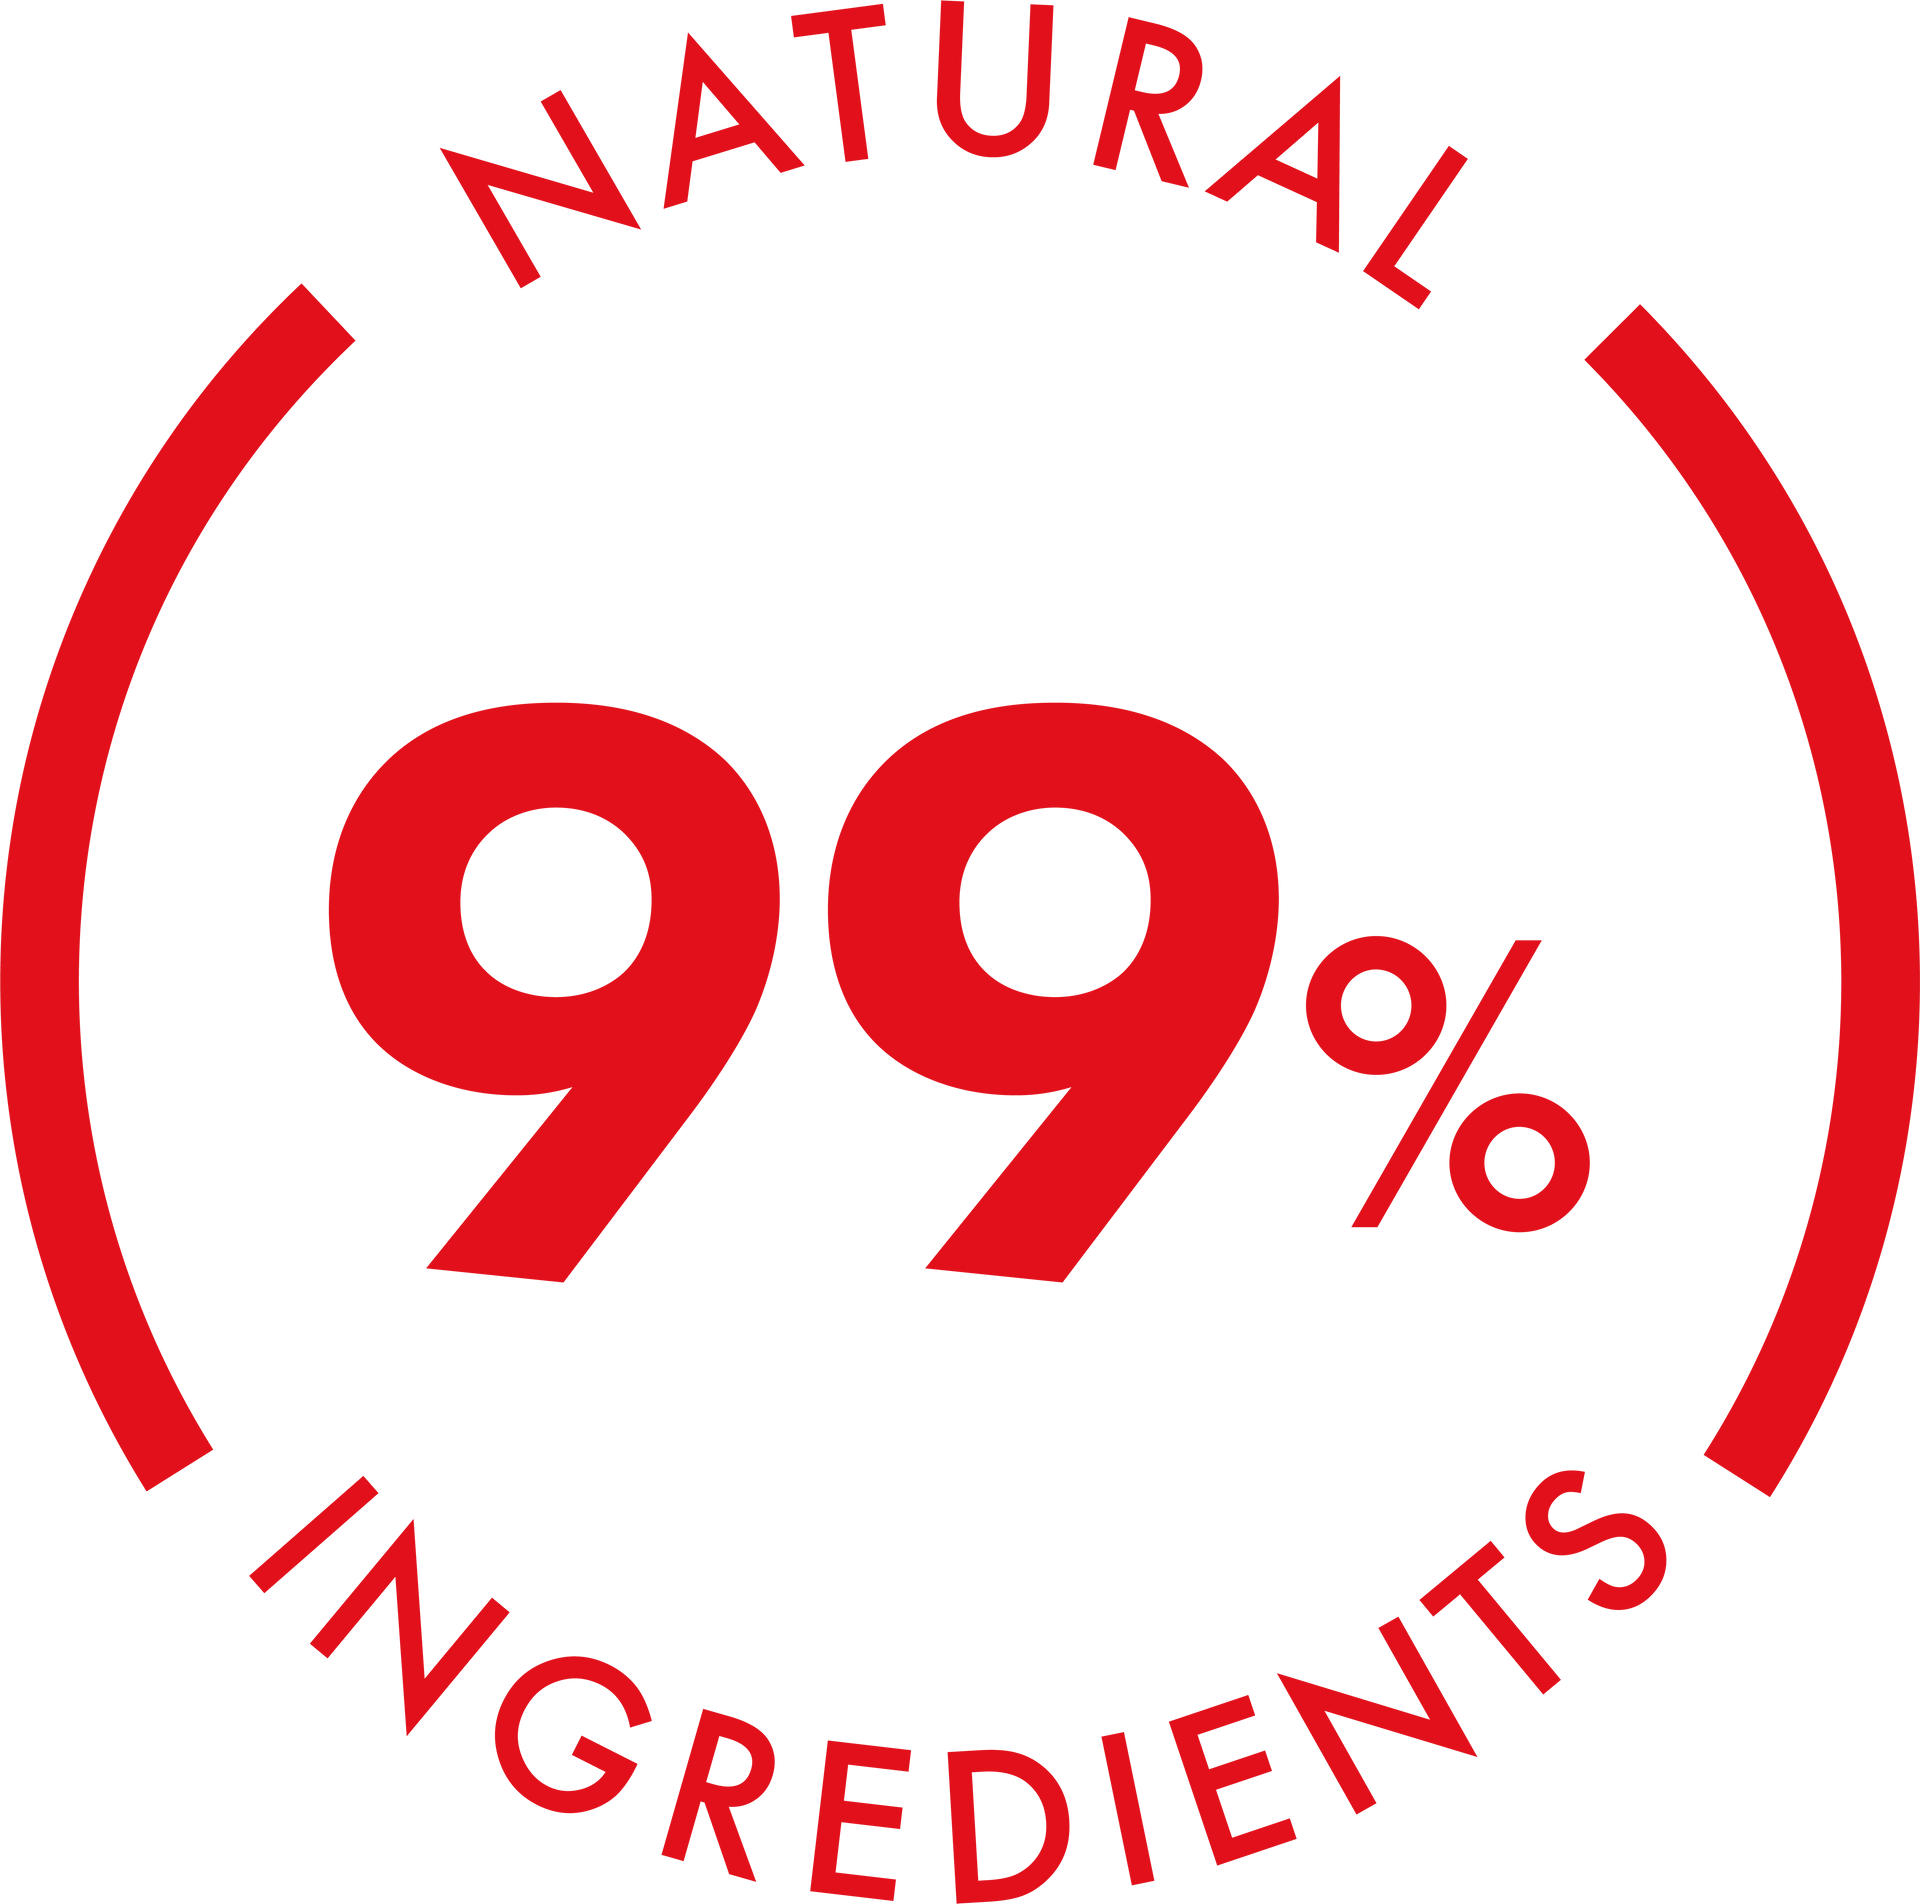 a logo that says 99 % natural ingredients